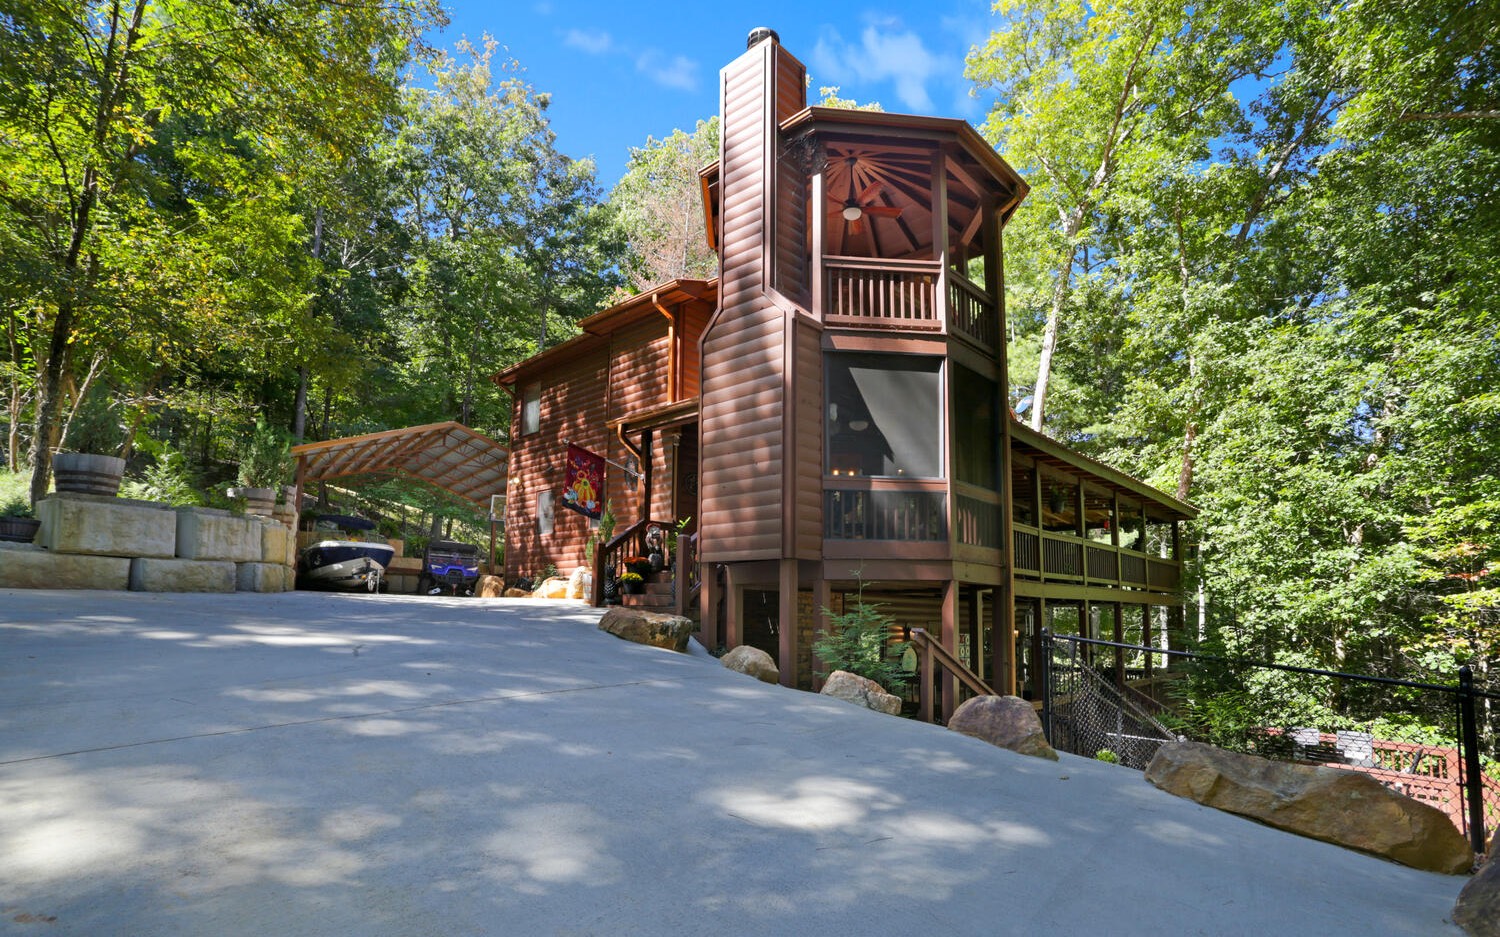 Enjoy this upscale Vacation Home in the Mountains right off the lake and in the heart of the Aska Adventure area and Necowa Cove. Room for all your guests - 3 suites and pull outs in basement. House designed for all your vacation needs. jacuzzi/fire pit/ covered porches/ outdoor fireplace/ green house / and covered pole barn for any and all toys. Decks have been expanded by 1600 square feet and over 900 sq feet of decks to the end of property which has a covered area for grilling and out door dining. Home has been recently been painted inside and out. Newer kitchen appliances and countertops. All lighting and fixtures are brand new. Home comes partially furnished. See attached furniture list. Come make yourself at home at your home away from home!